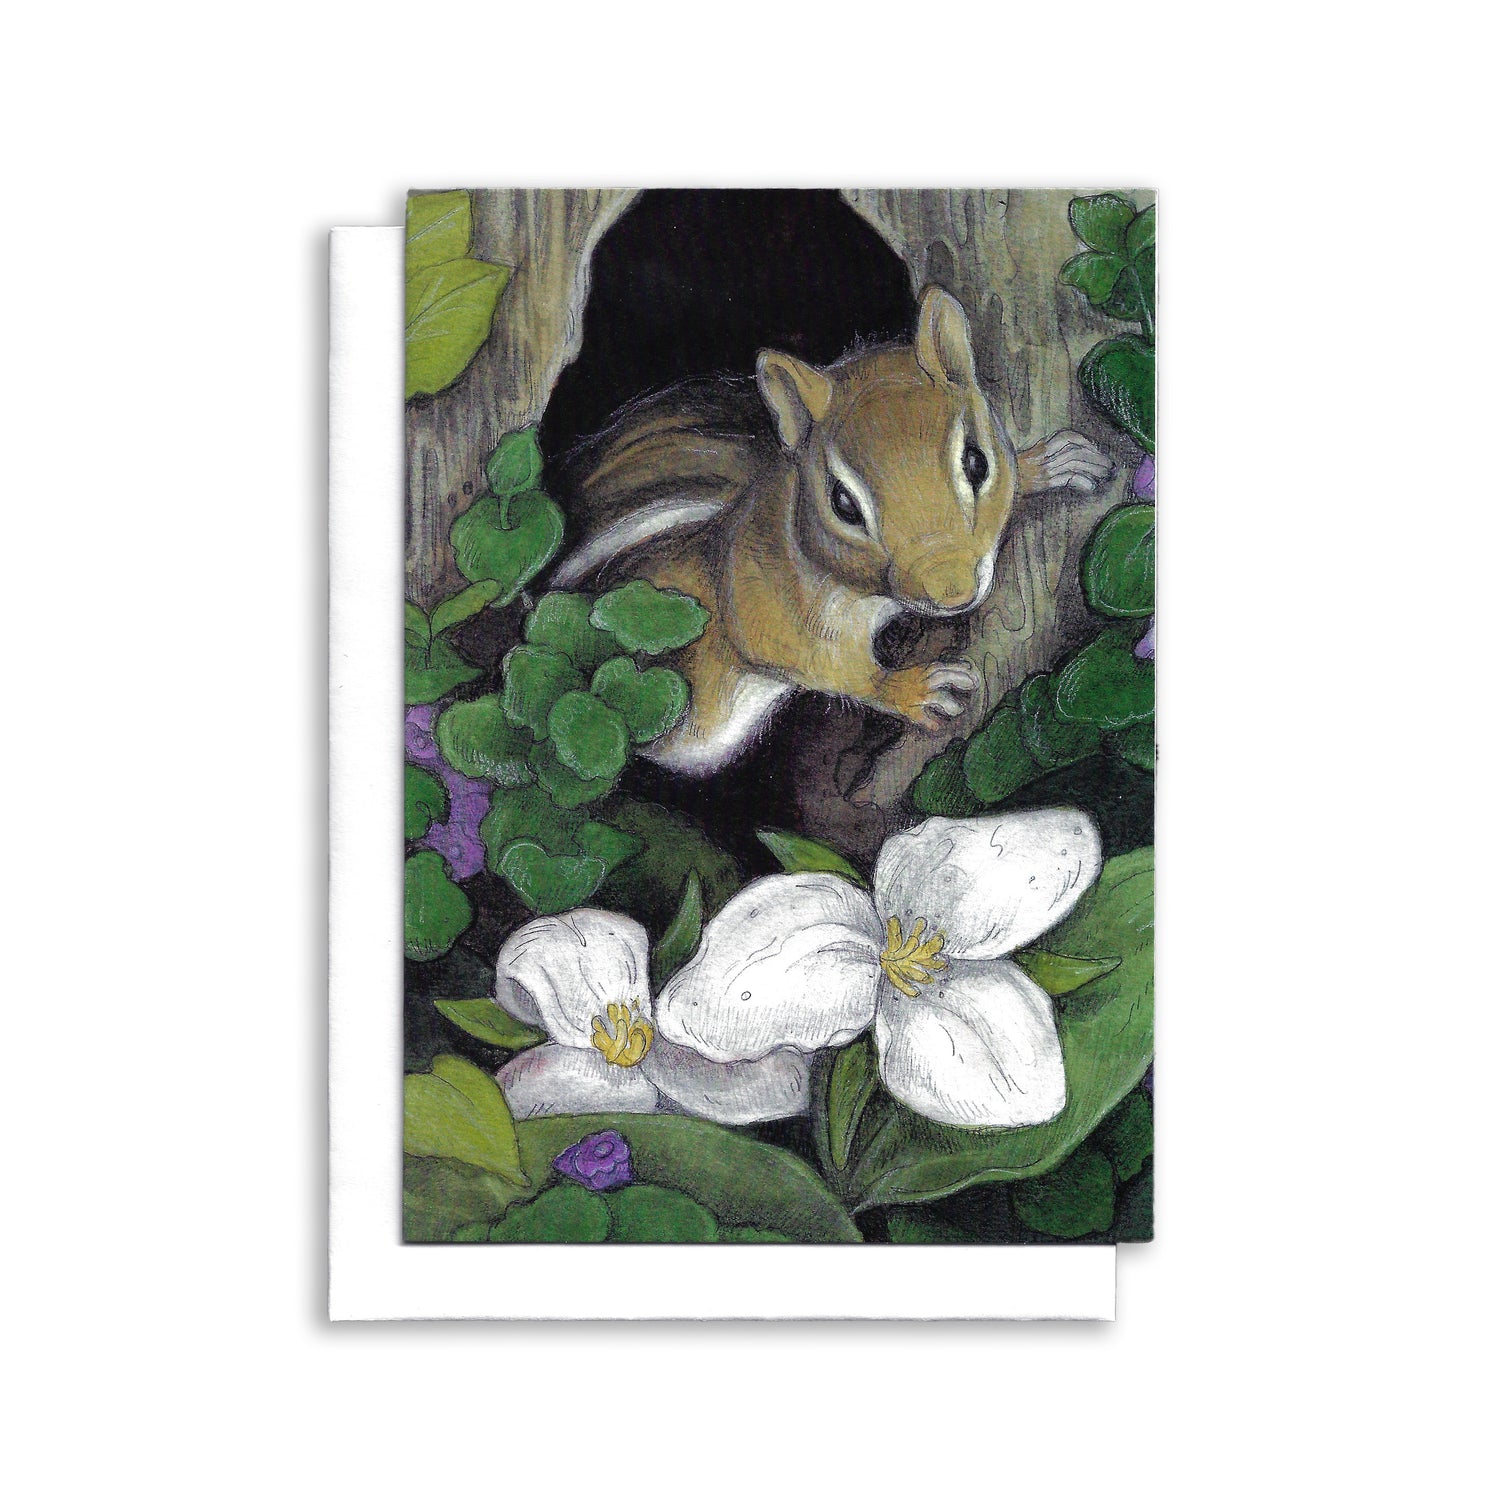 An illustrated greeting card showing a chipmunk peaking out from a tree hollow. There are trilliums and purple flowers in the foreground.